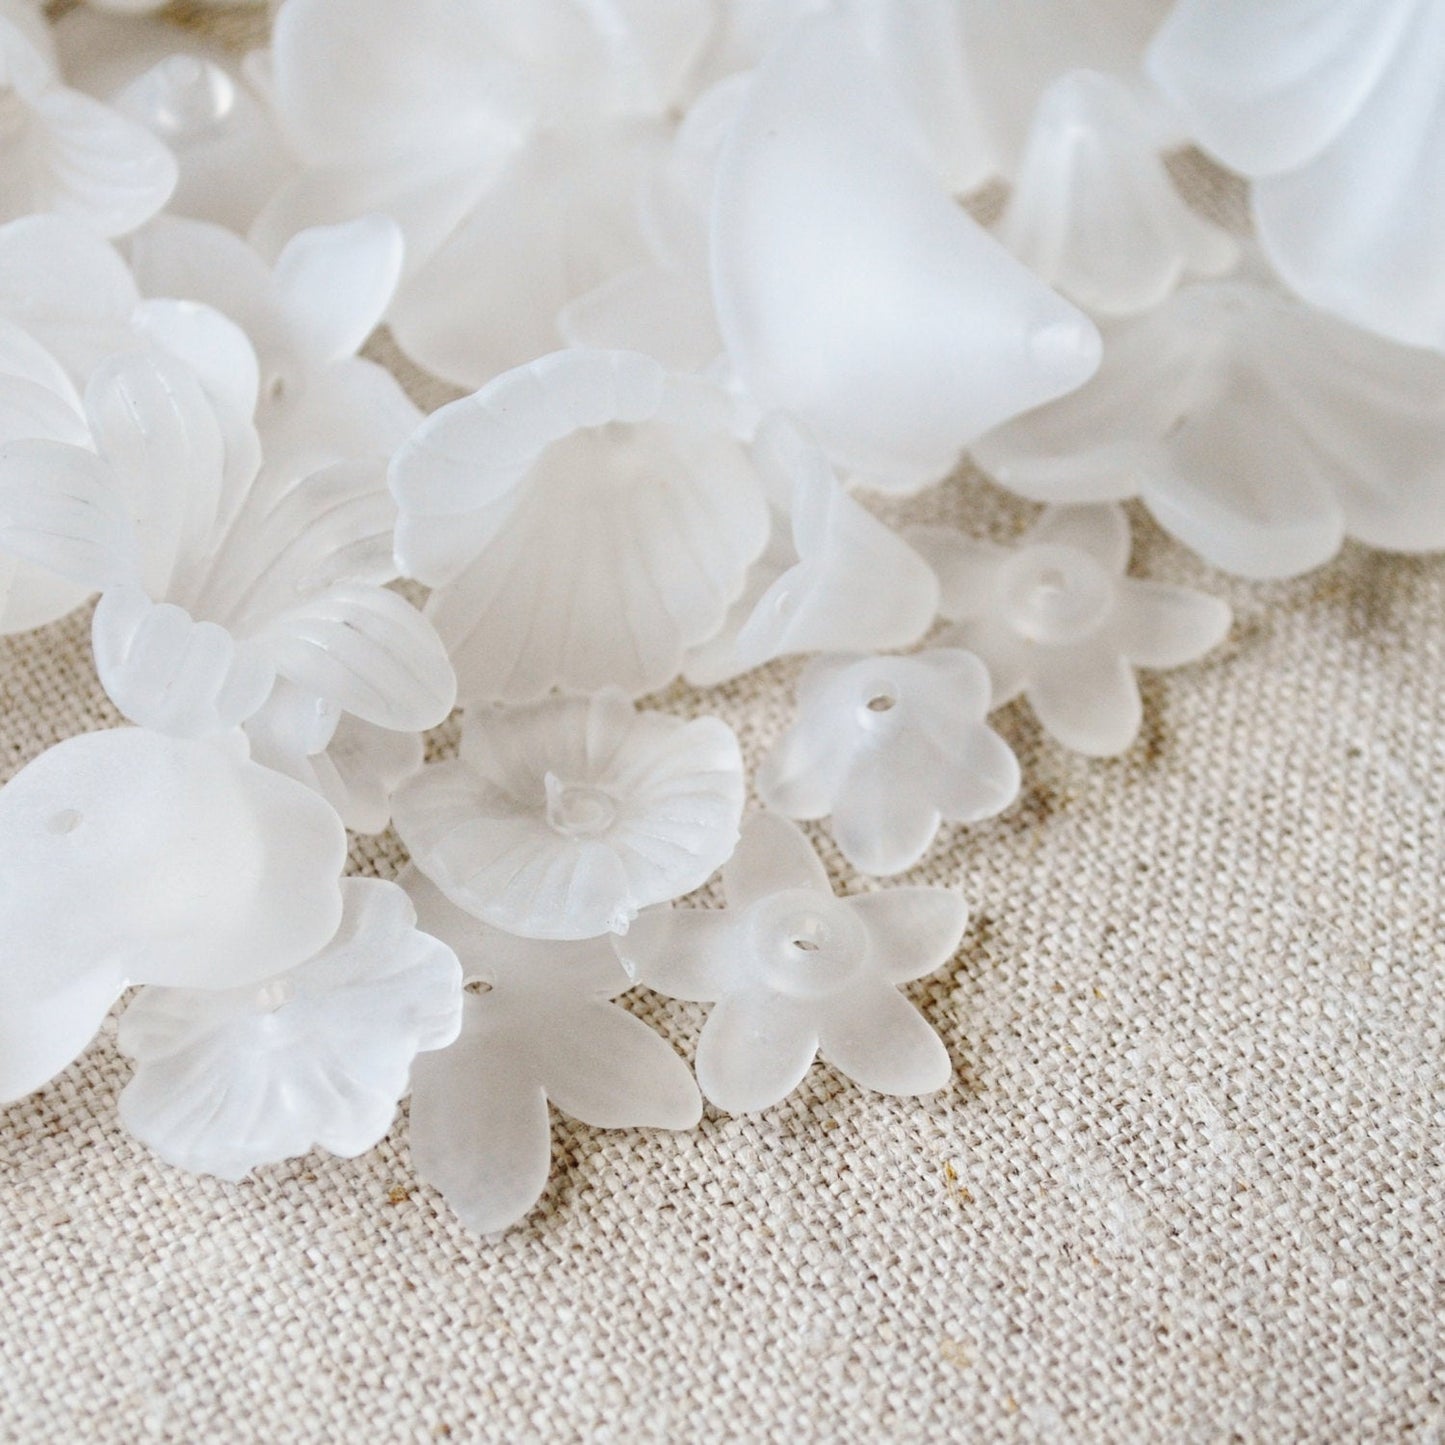 Assorted Frosted Flower Beads Semi-Translucent White in Random Sizes and Shapes